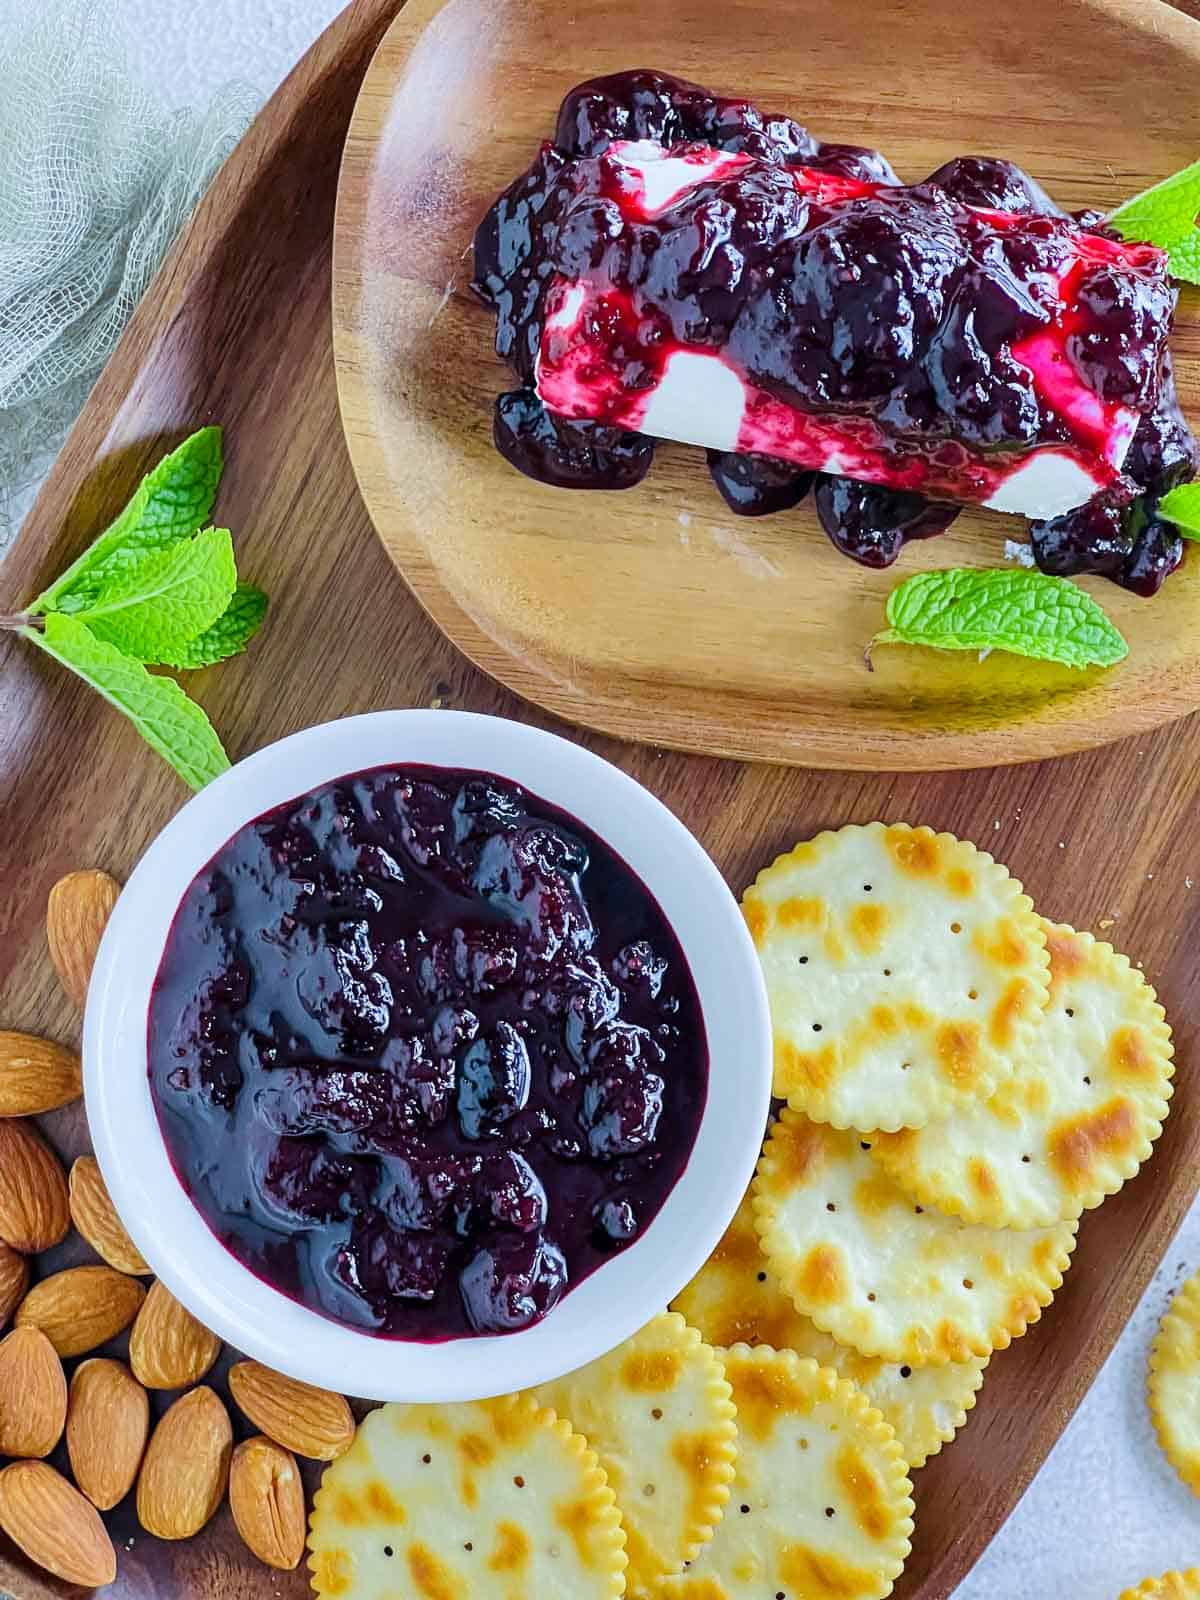 Blueberry chutney in a white bowl placed on a wooden board with crackers, nuts, and goat cheese.